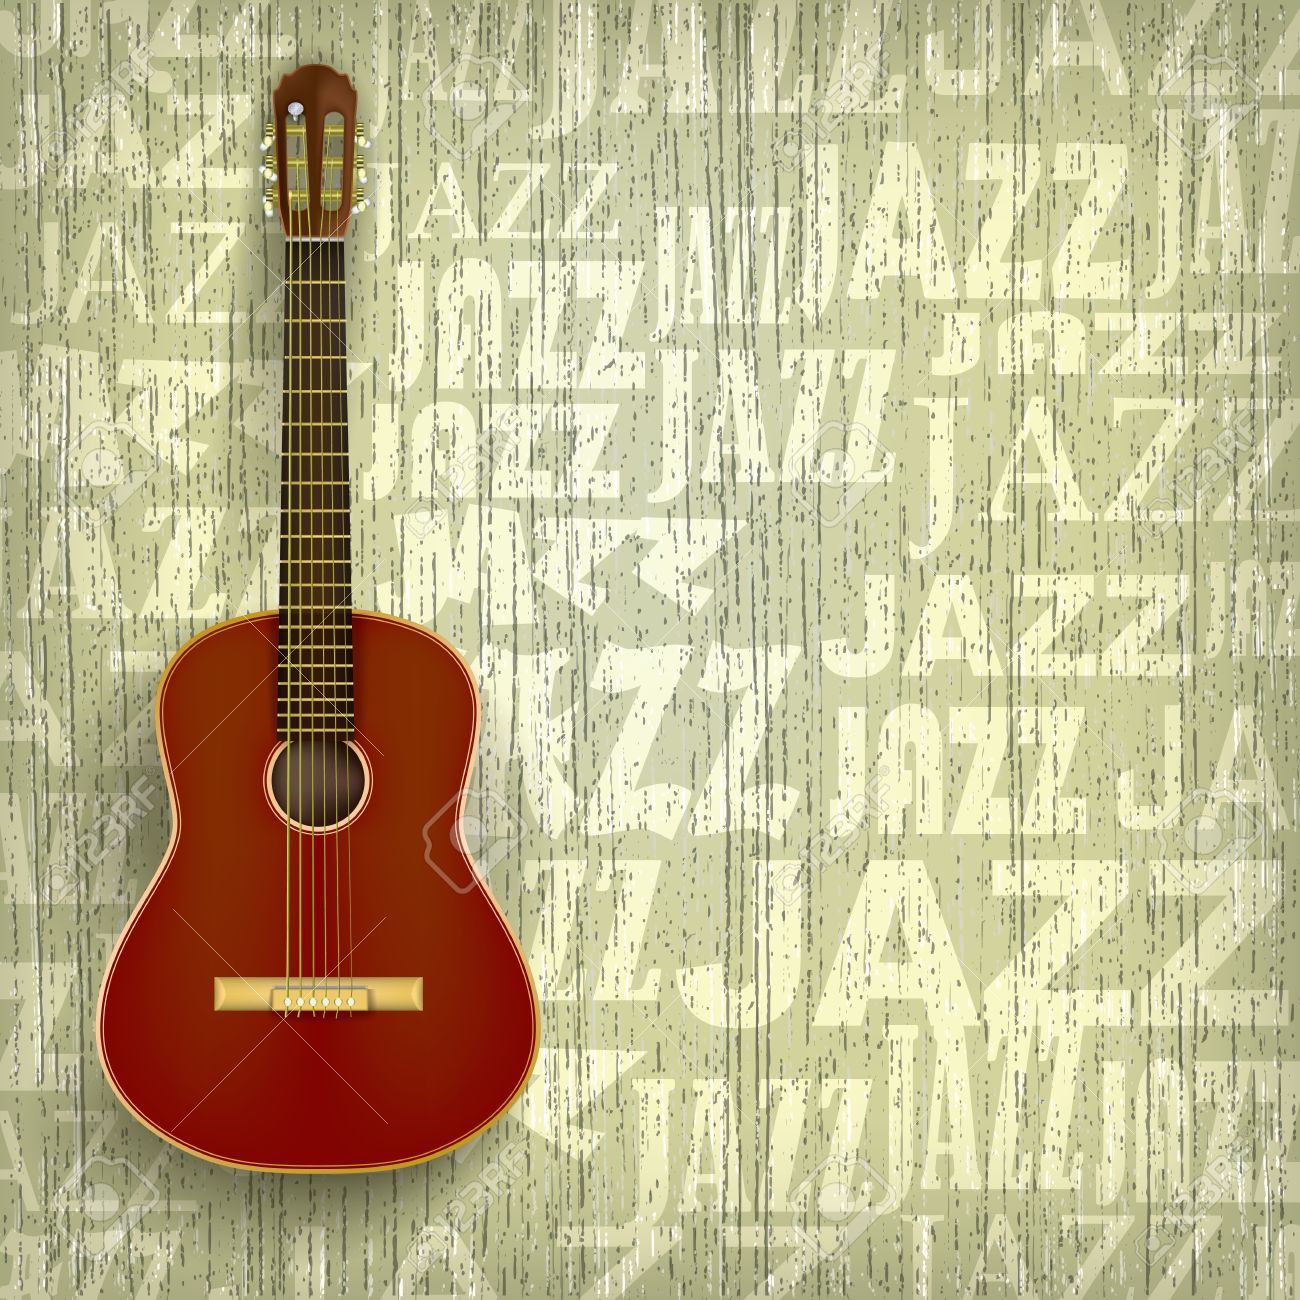 Abstract Grunge Jazz Background With Classical Guitar Royalty